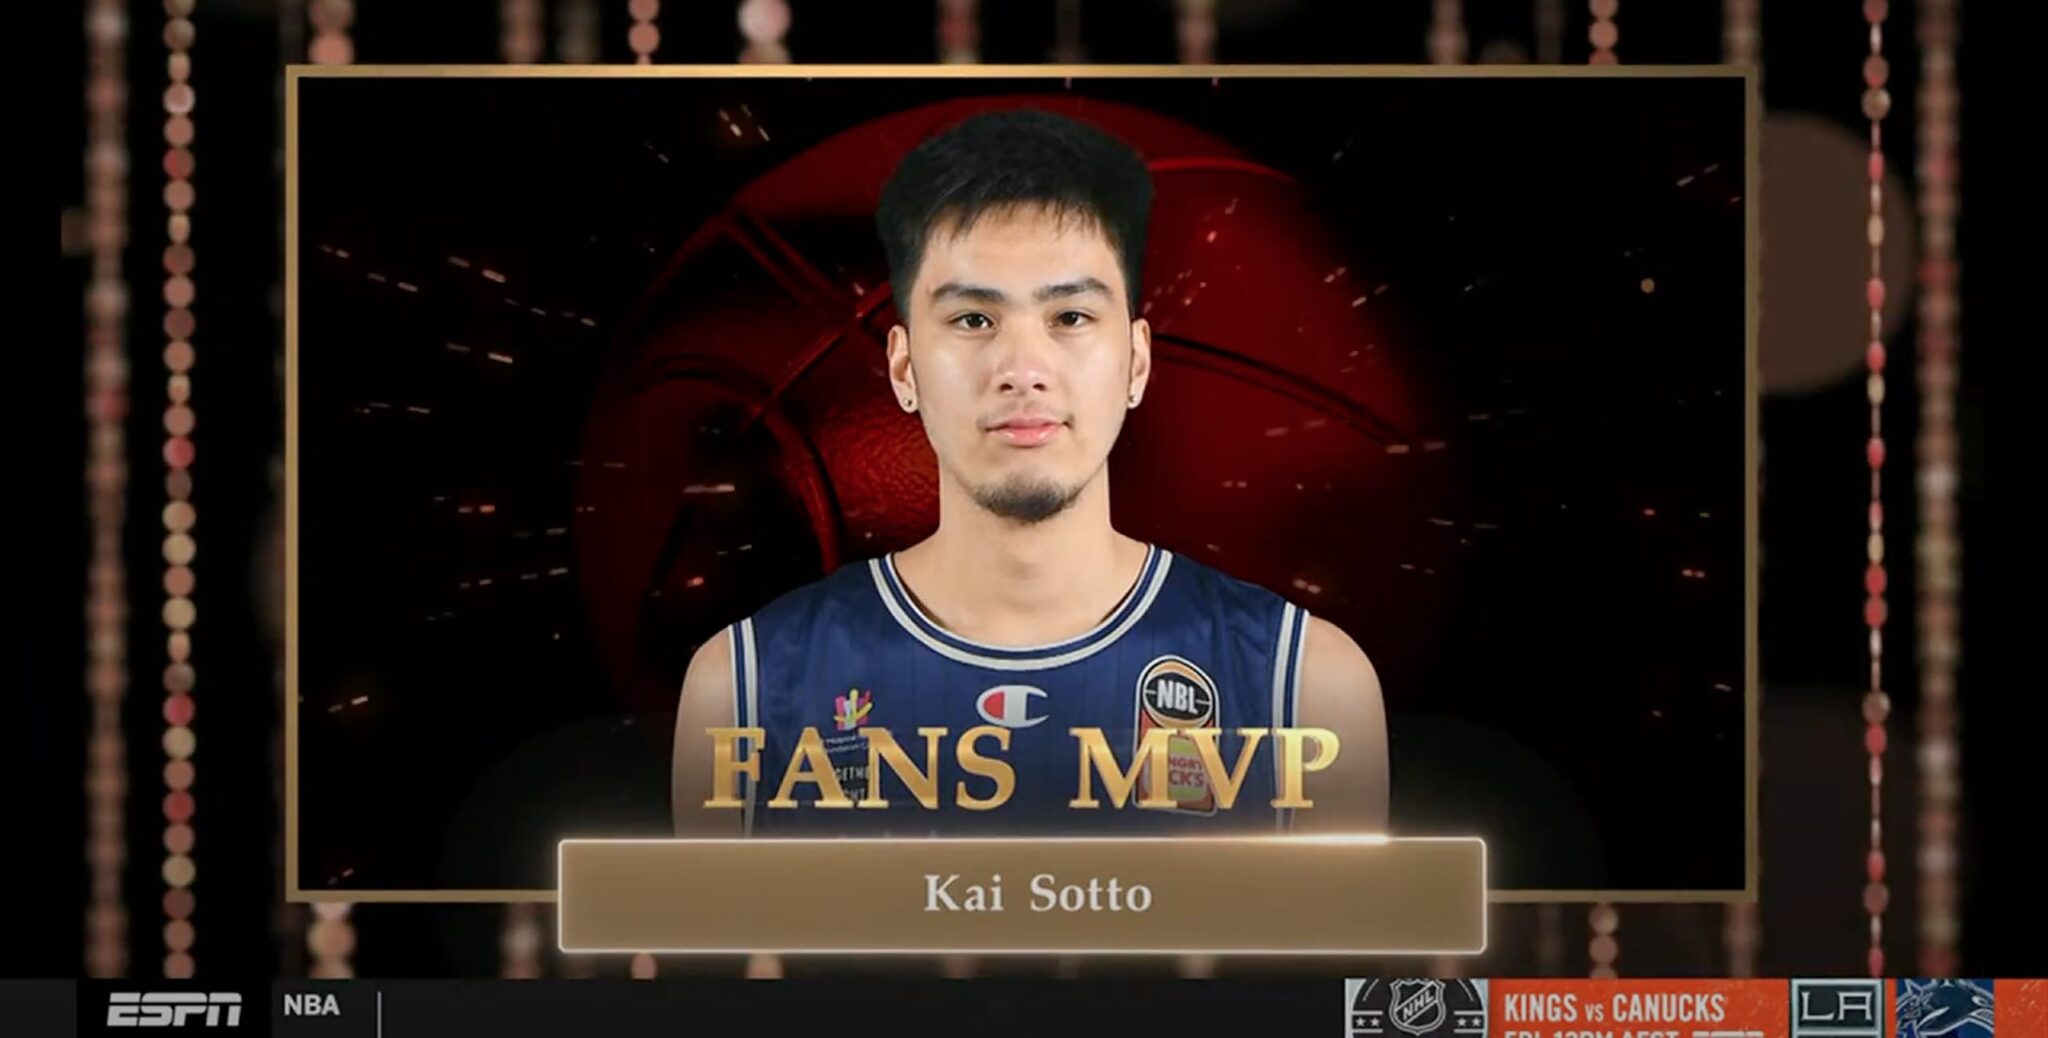 Filipino basketball star Kai Sotto crowned Fans' MVP, declares for NBA